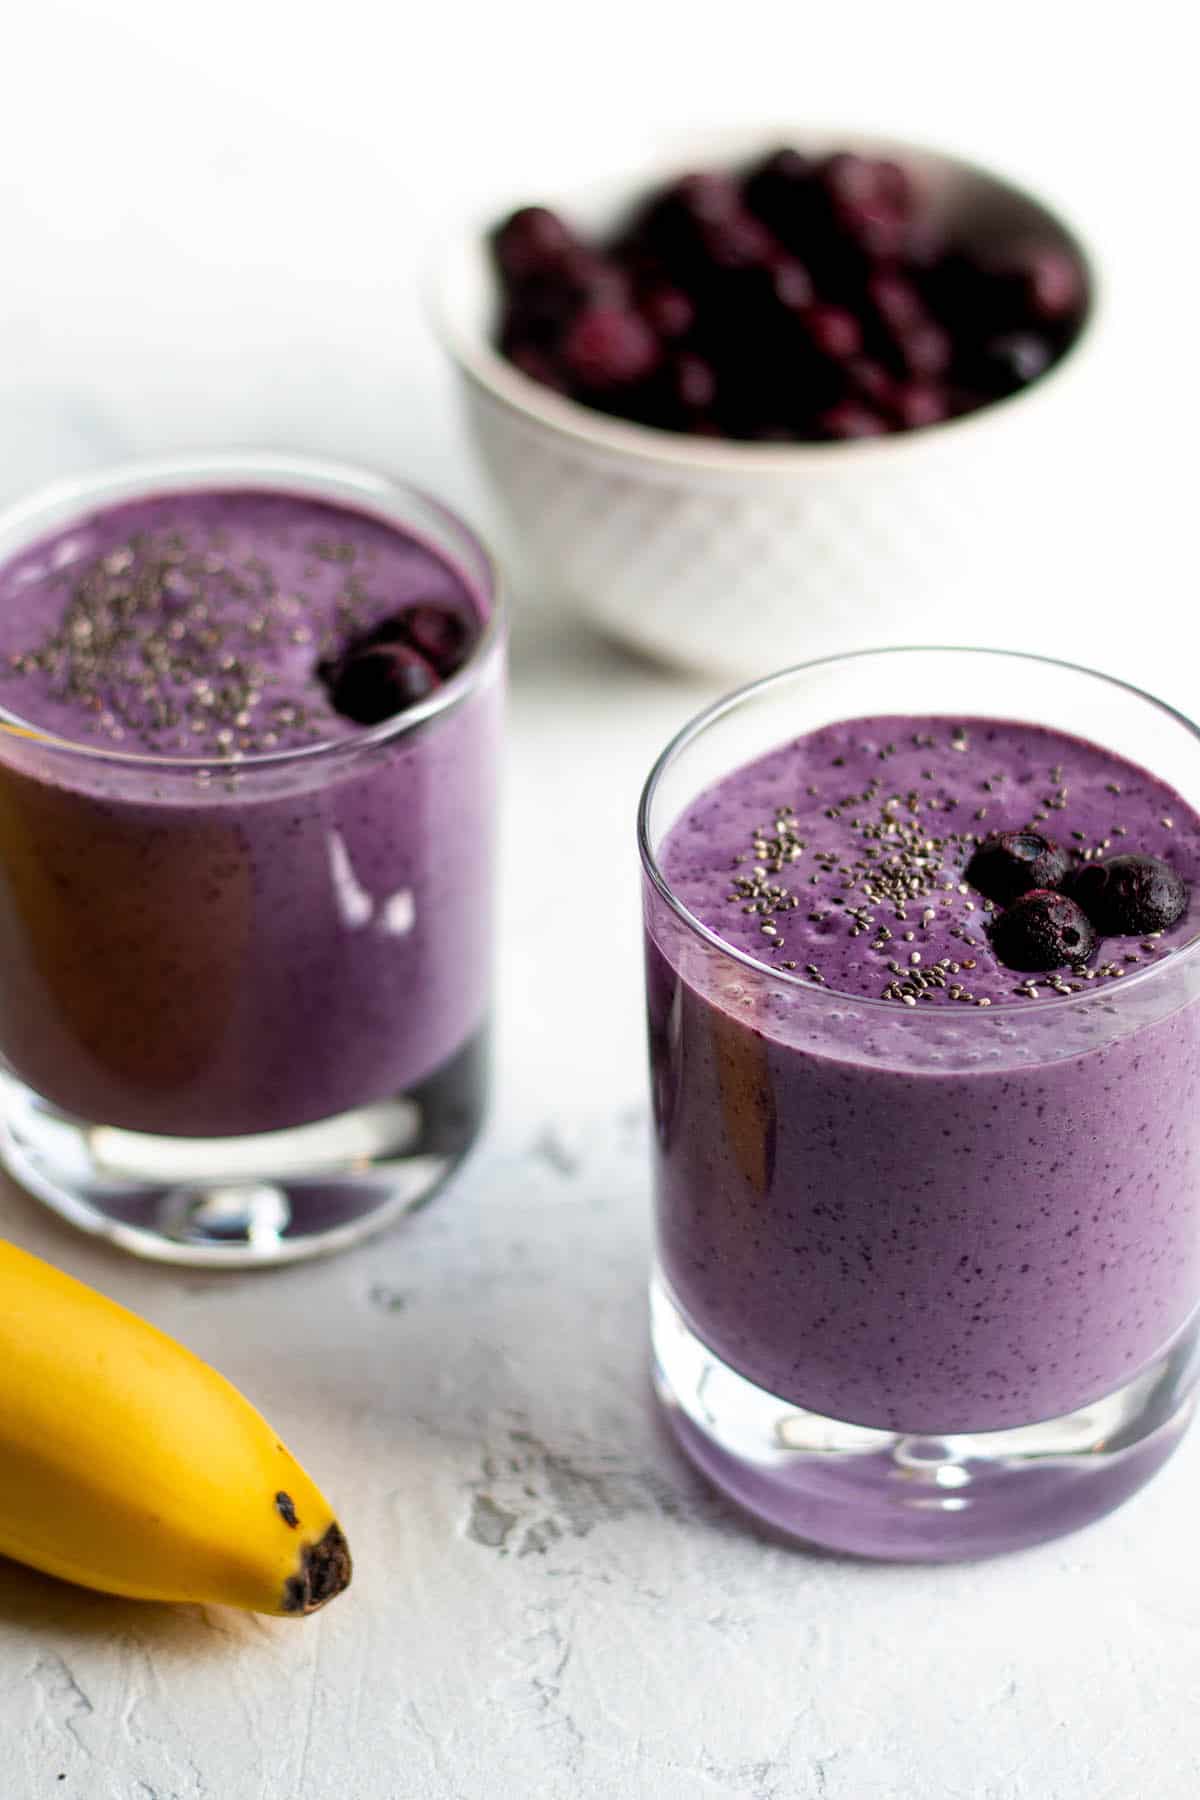 Two small glasses with a purple smoothie, a bowl of blueberries and a banana.